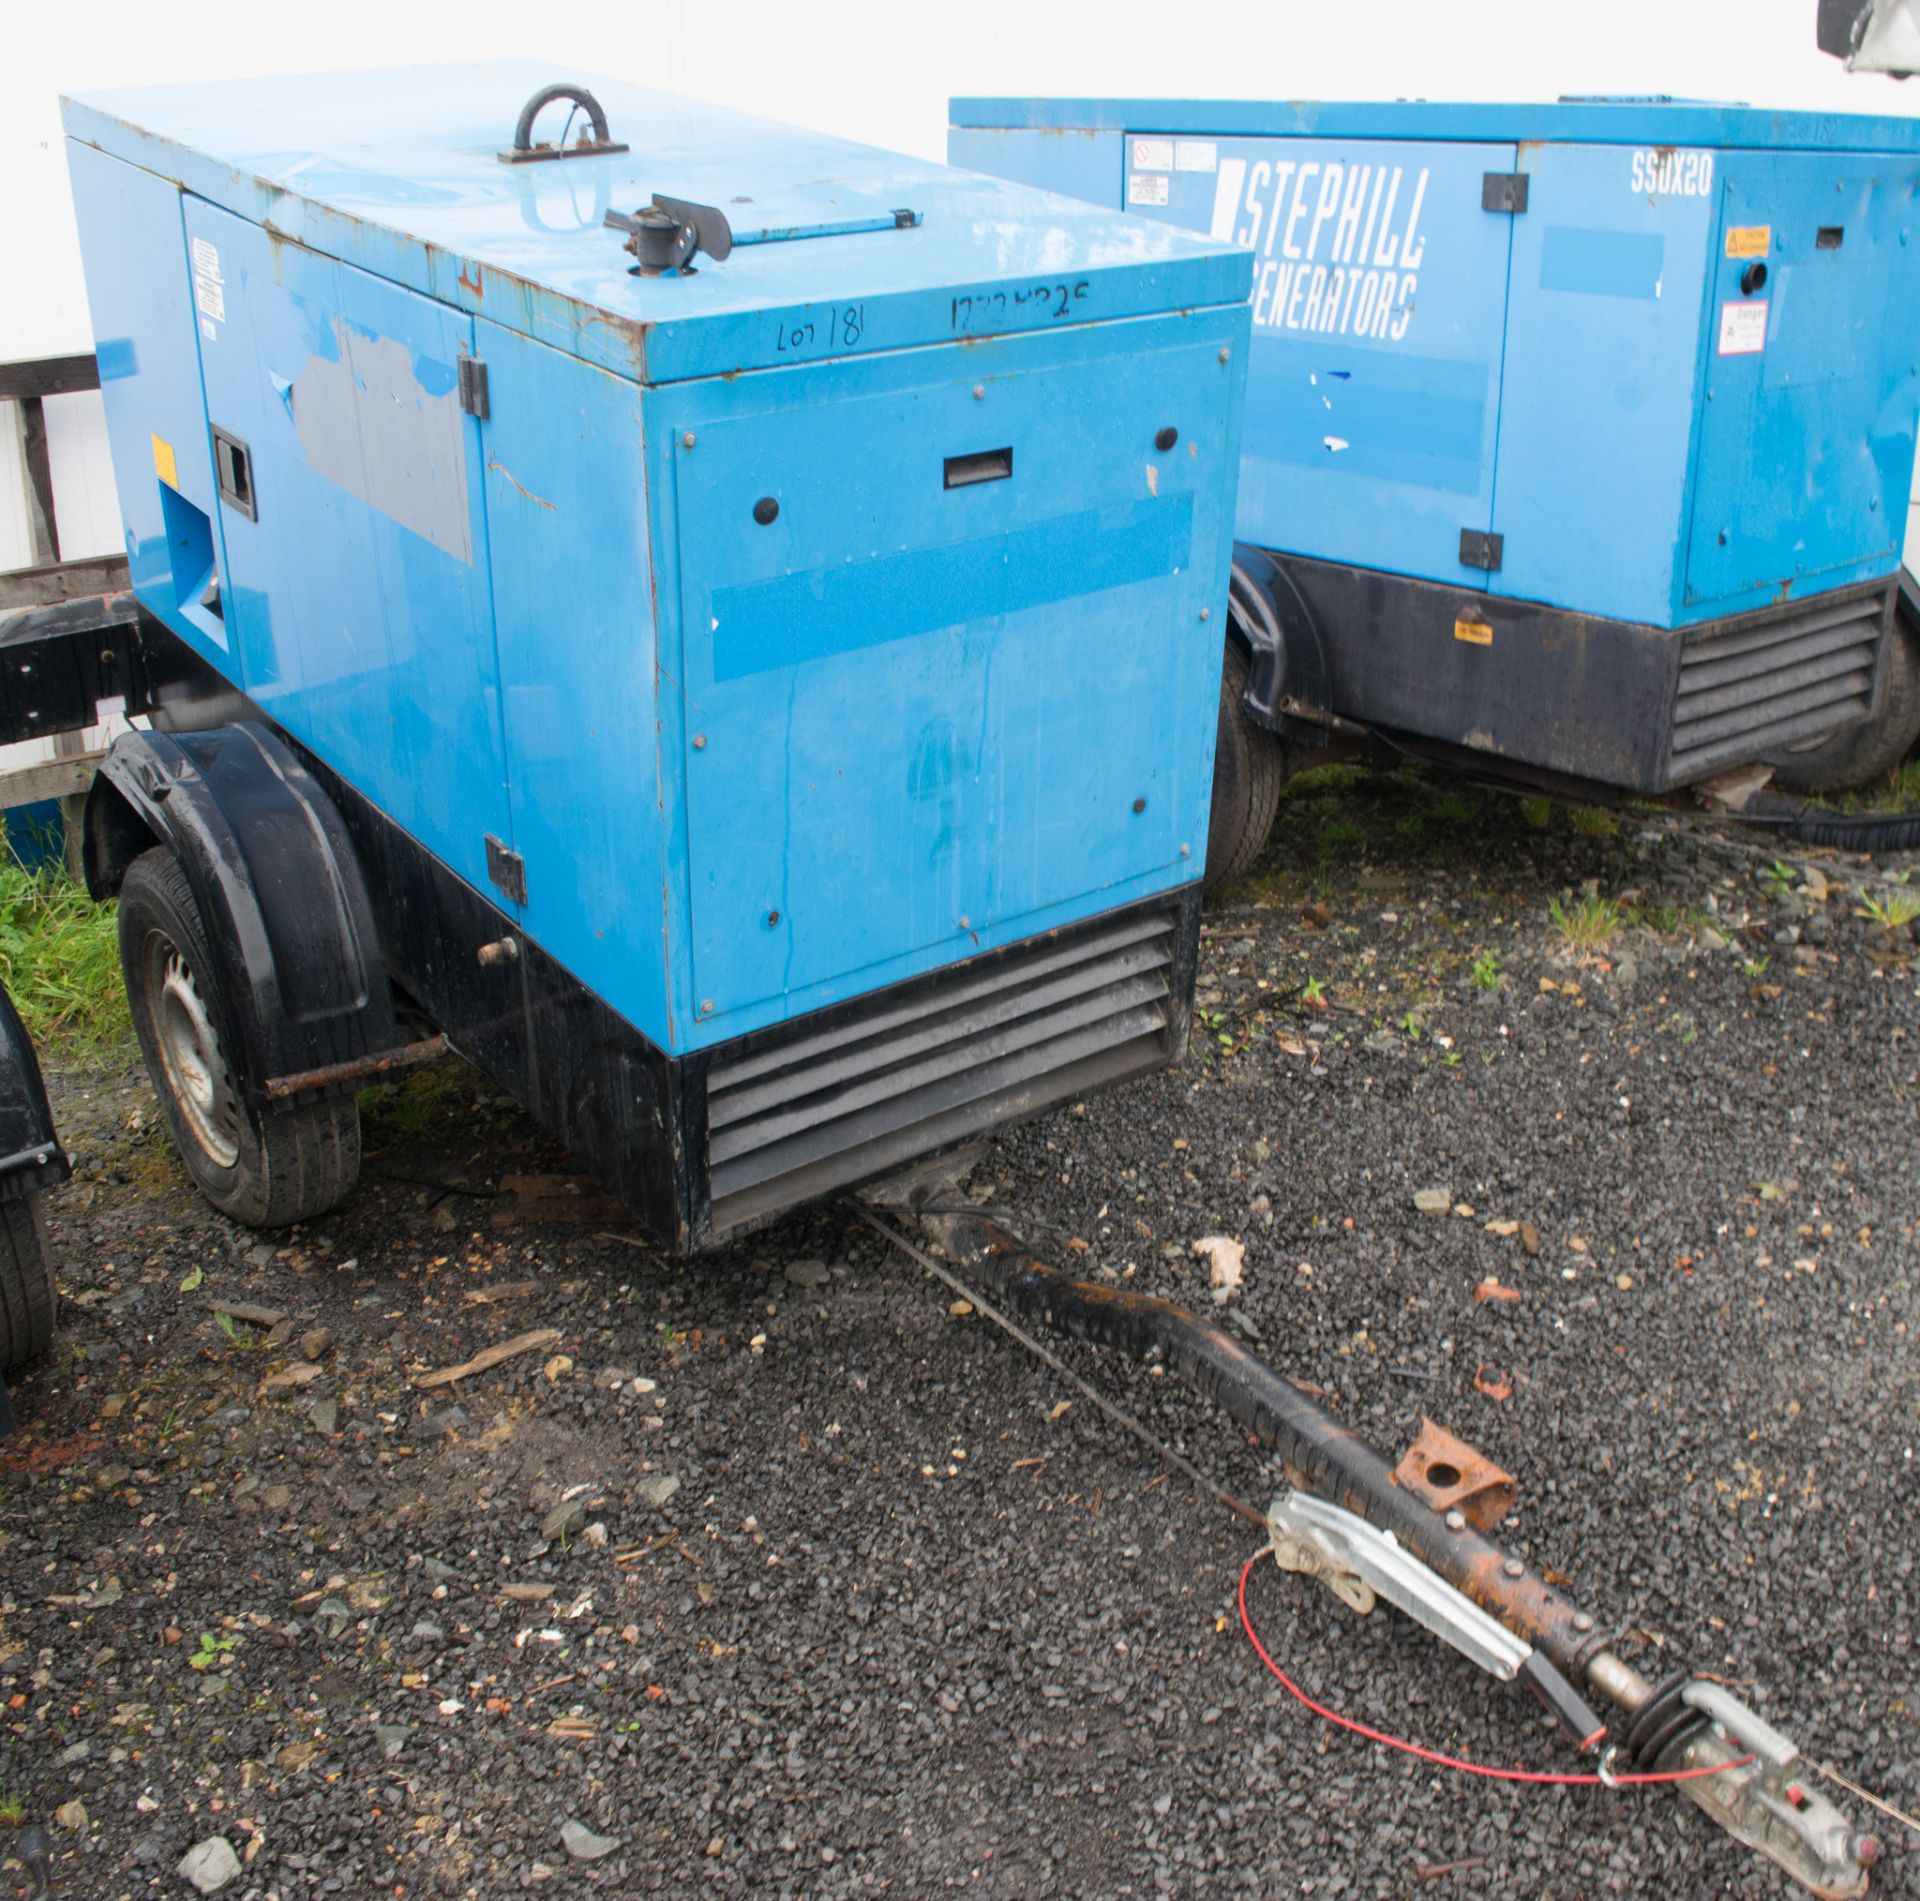 STEPHILL SSDX 20 20 Kva diesel driven fast tow generator Recorded hours: 15602 1232MP25